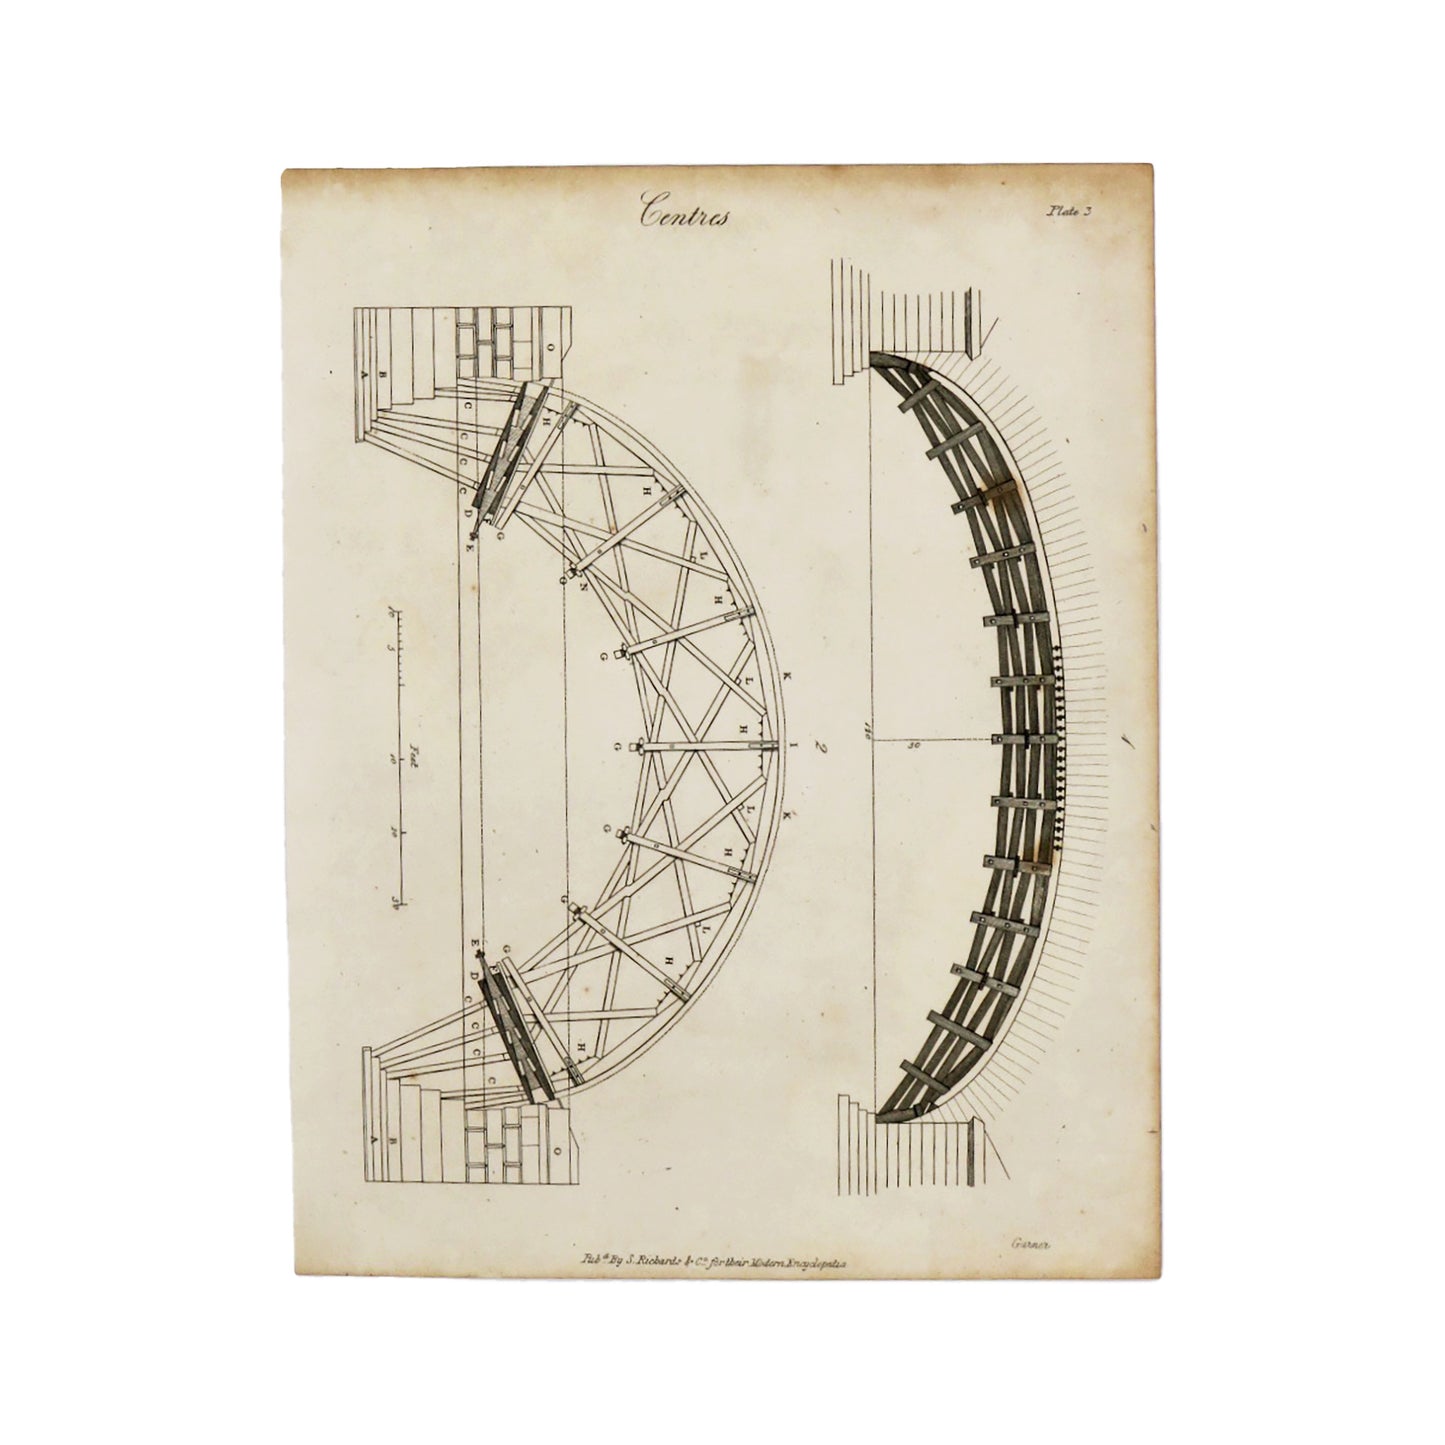 Centres Plate 3  Antique 1820 Engraving from "The Modern Encyclopedia: The Latest Discoveries in each Department of Knowledge."  1820s etching depicting the dimensions for the construction of various arches.  Measures 10.5 x 8.25 inches.